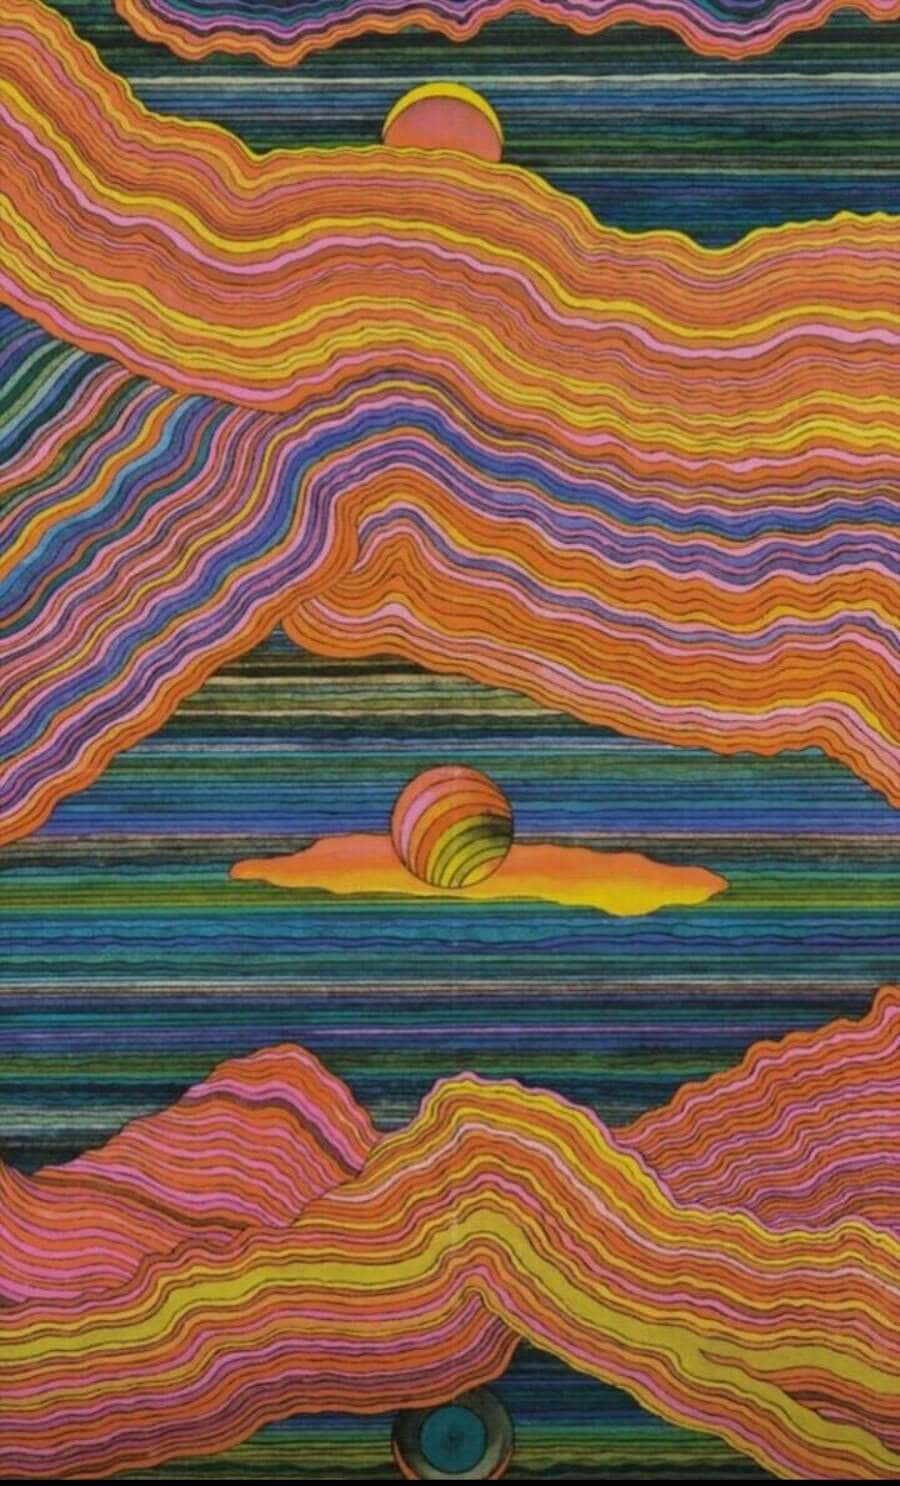 Groovy 70s Psychedelic Art Explosion Wallpaper